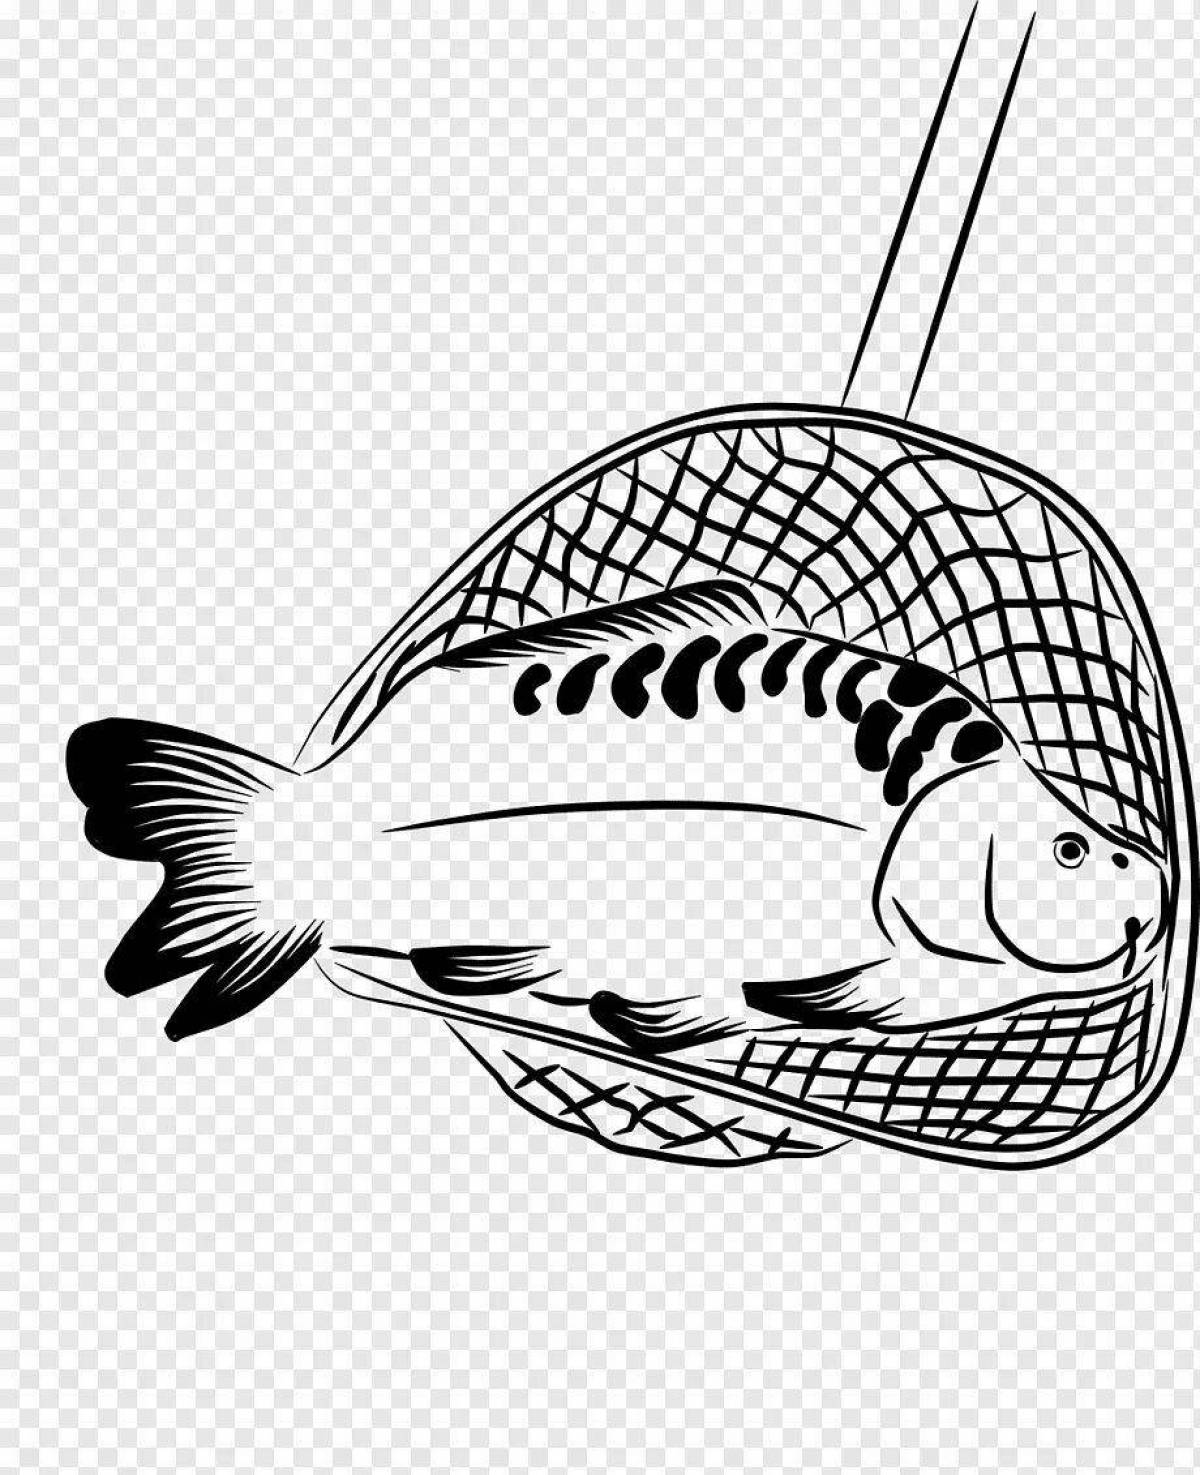 Coloring page charming crucian fish